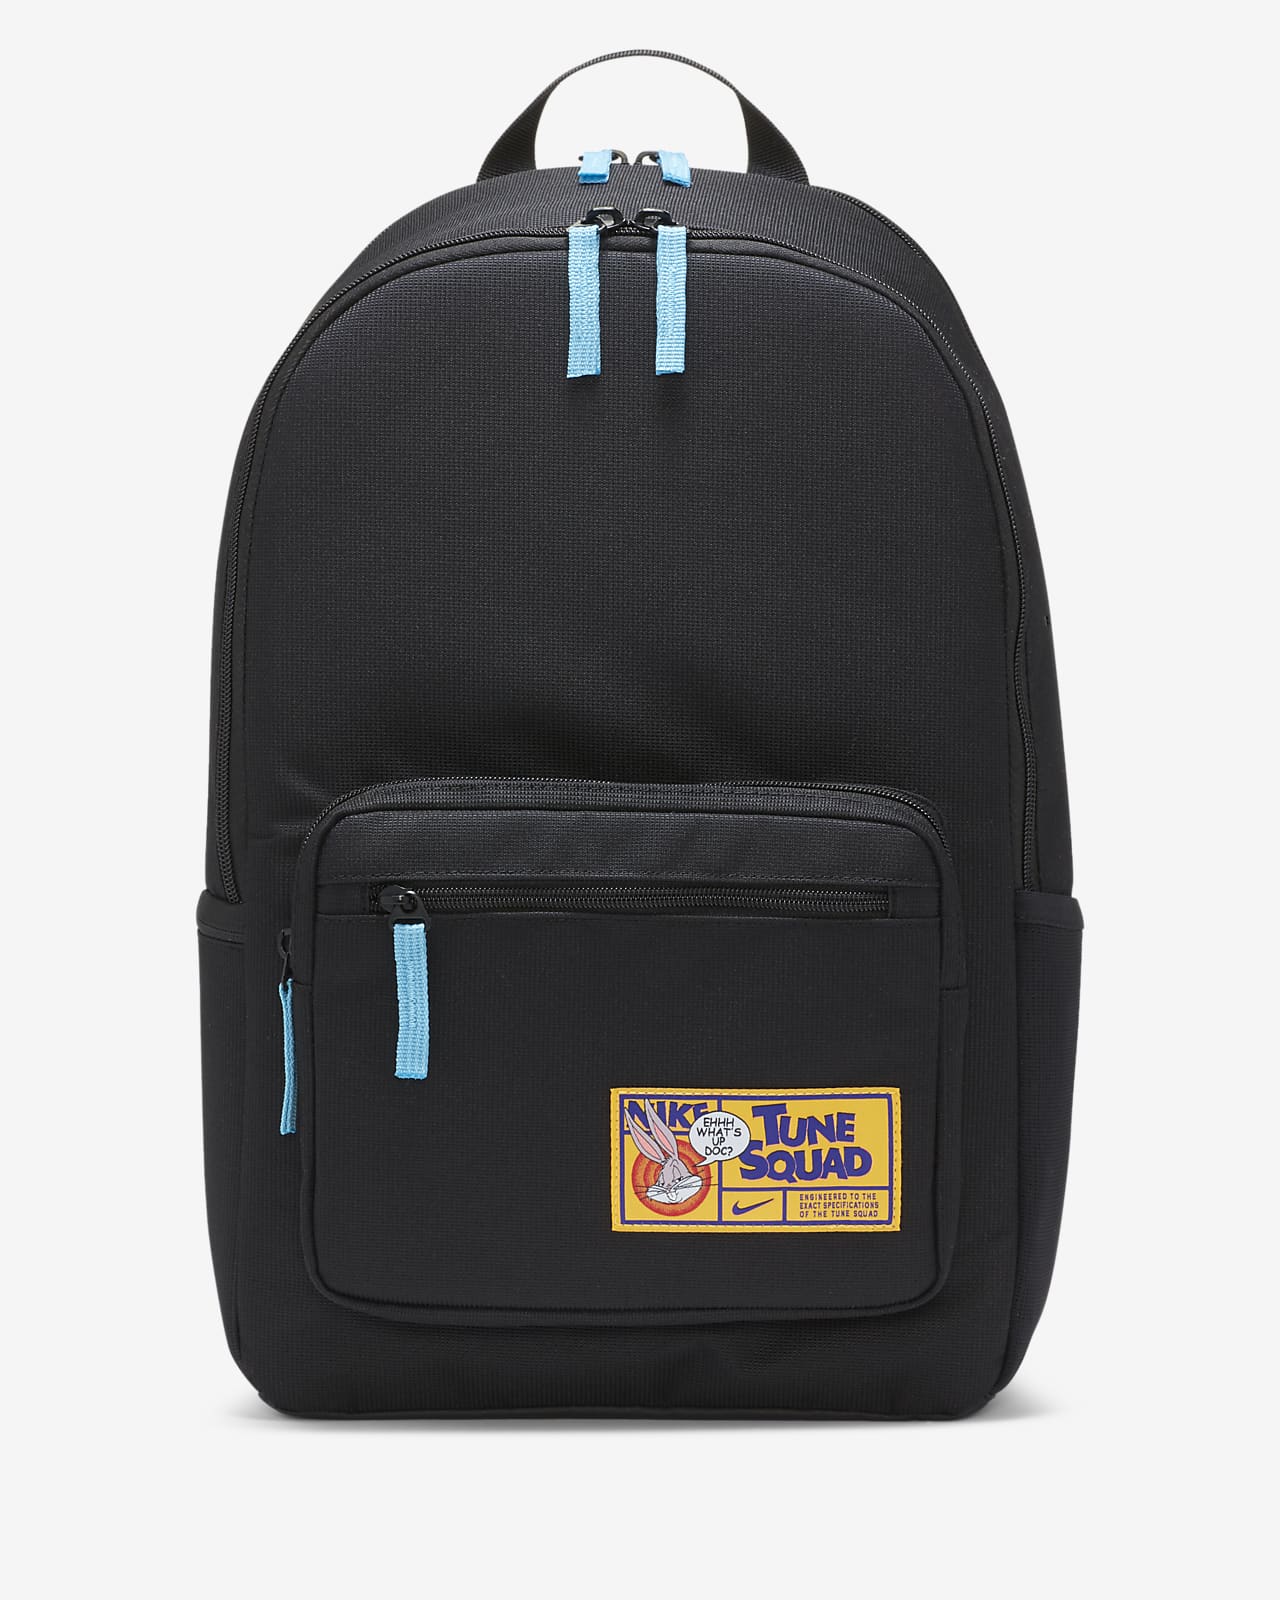 Nike Heritage x Space Jam: A New Legacy "Tune Squad" Eugene Backpack (23L)